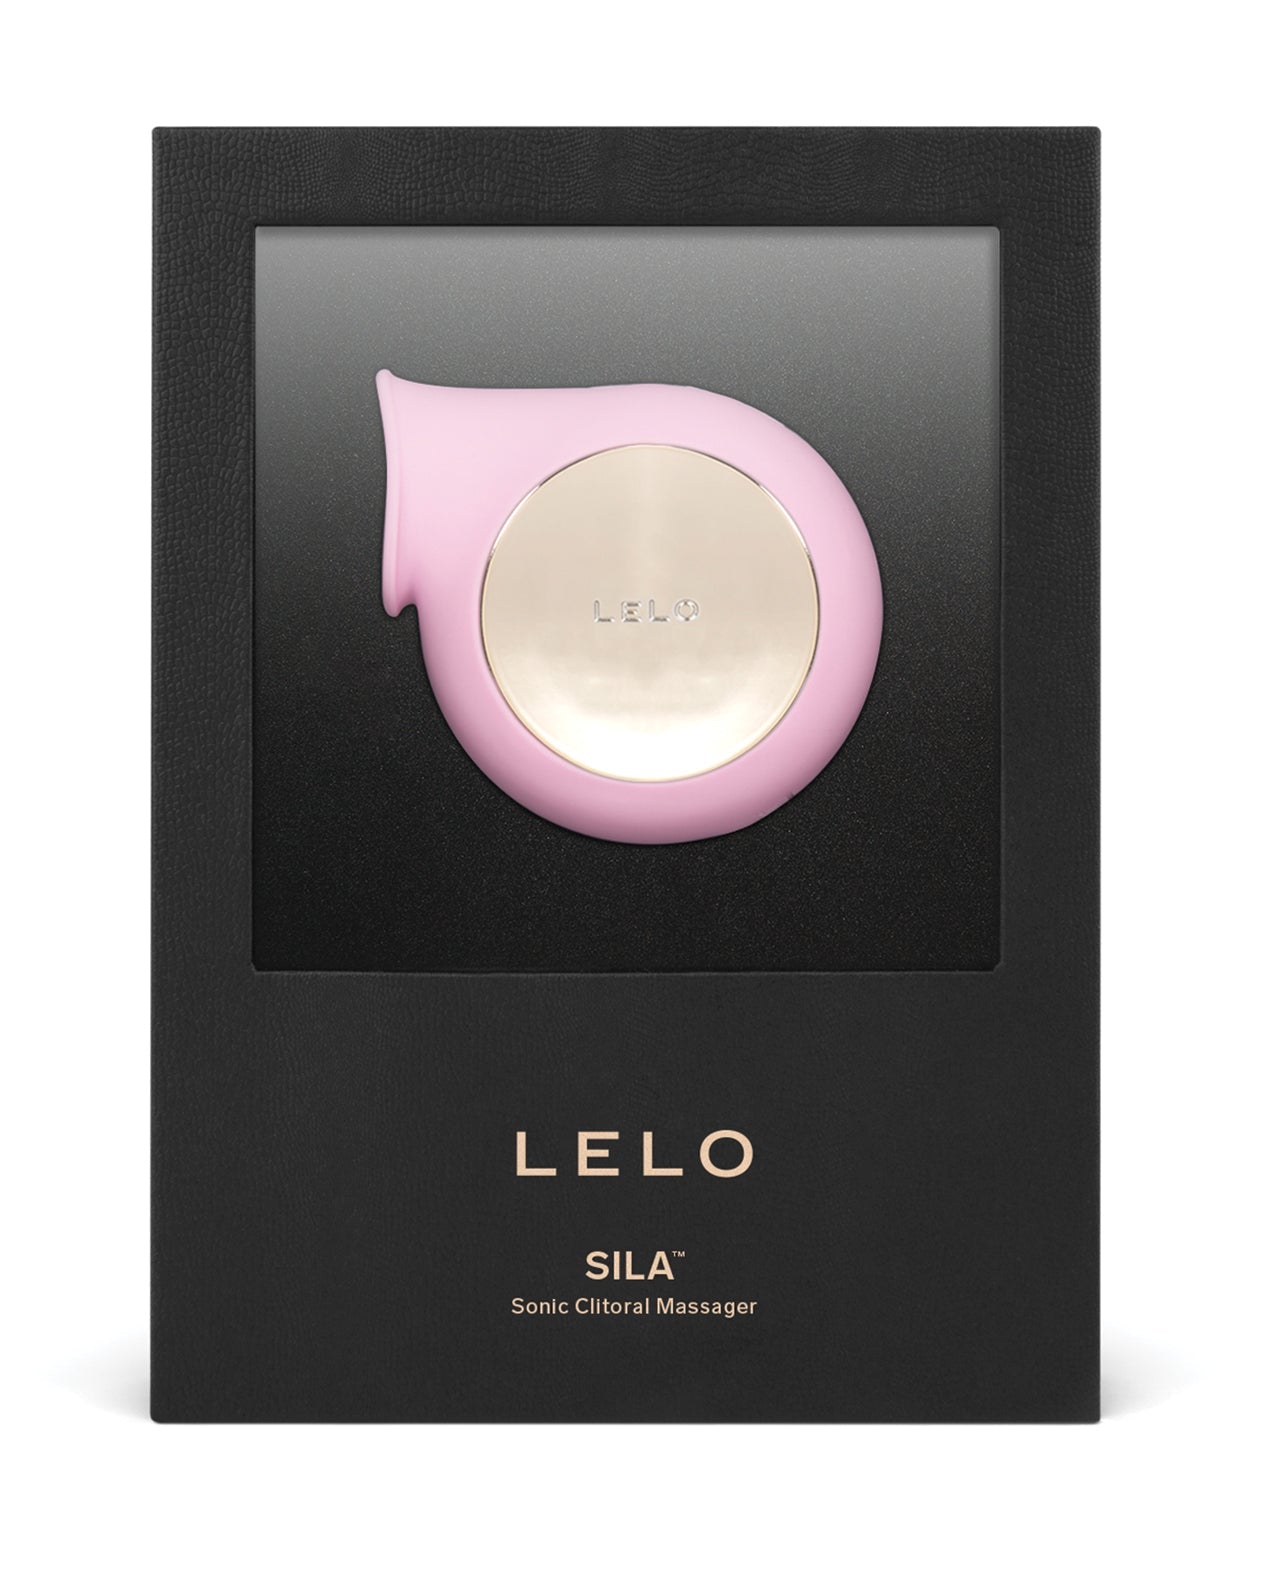 LELO Sila Sonic Clitoral Massager – Pink